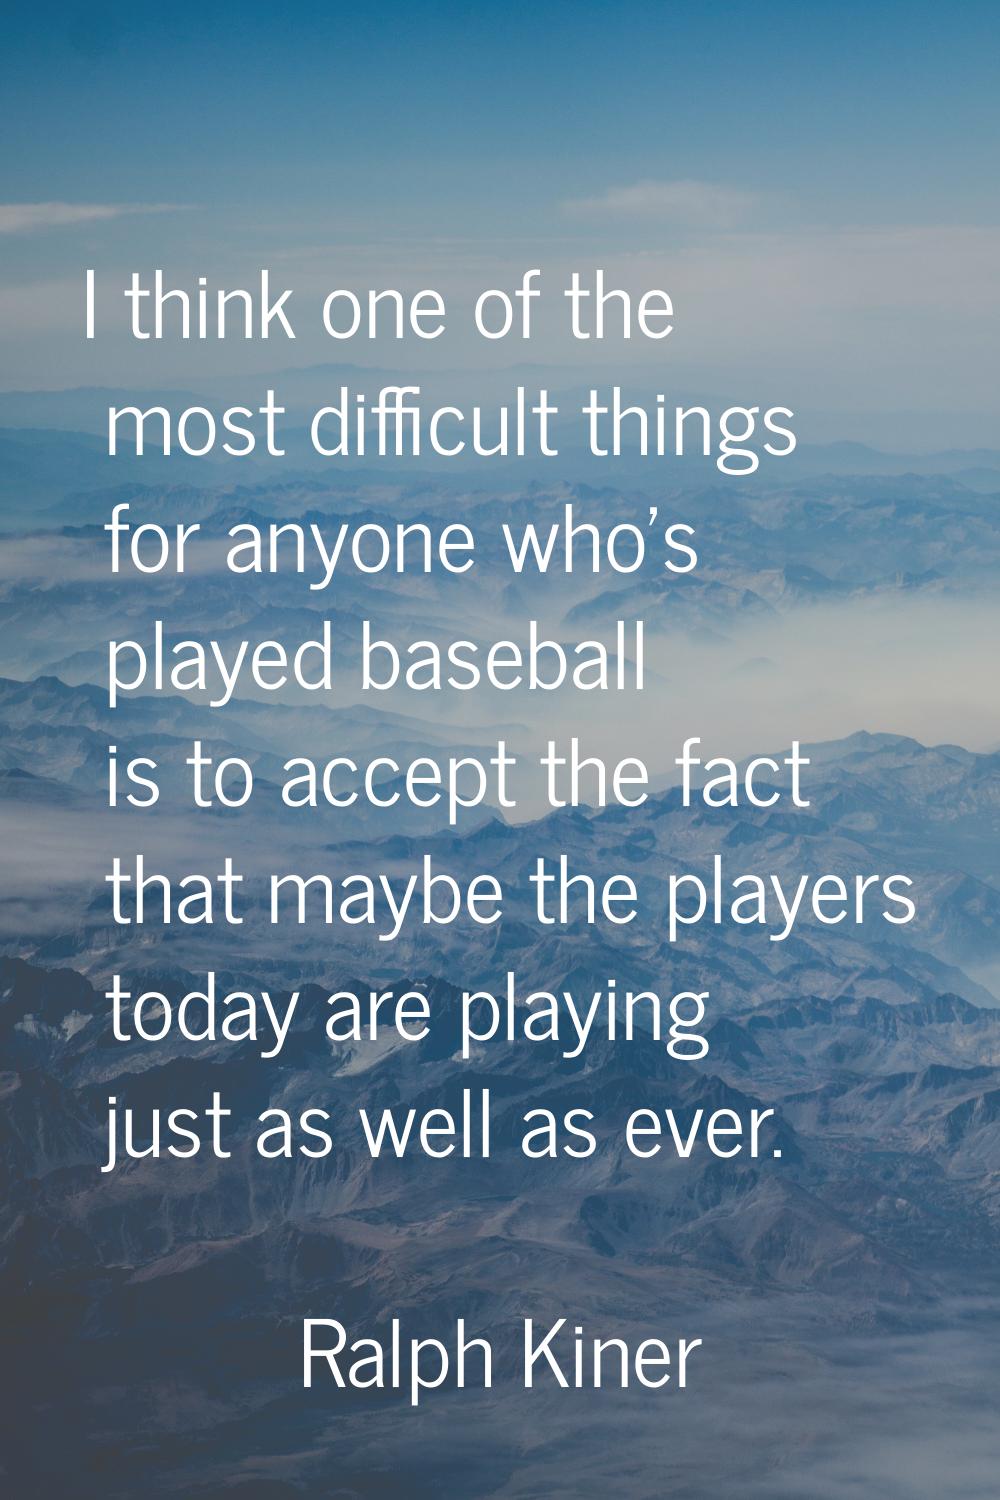 I think one of the most difficult things for anyone who's played baseball is to accept the fact tha